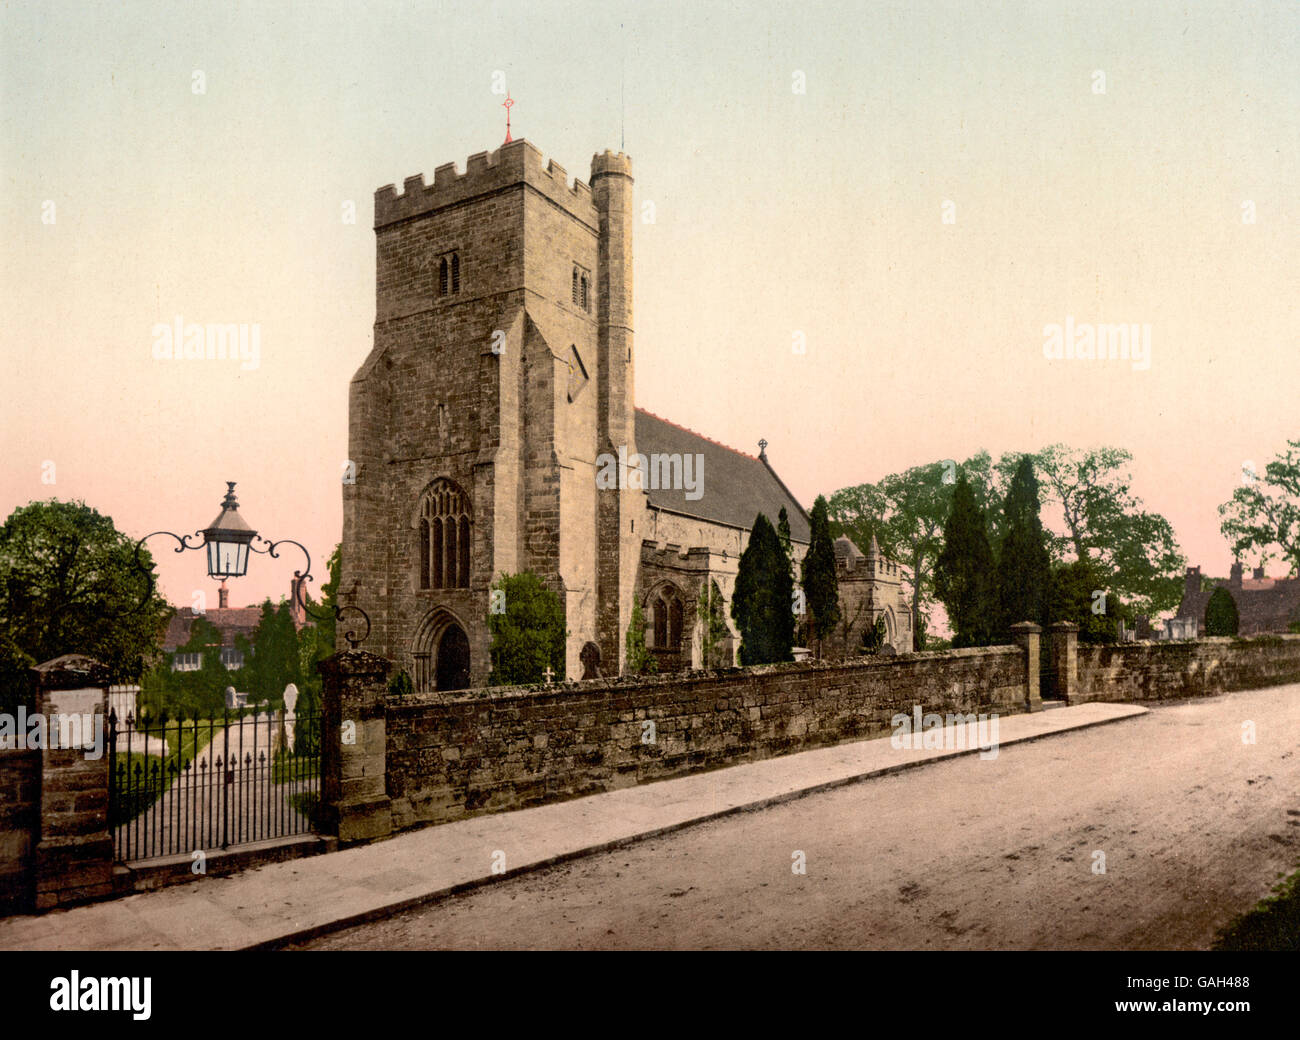 The Church, Battle, England. Image shows St. Mary the Virgin Church, Battle, East Sussex, England, circa 1900 Stock Photo